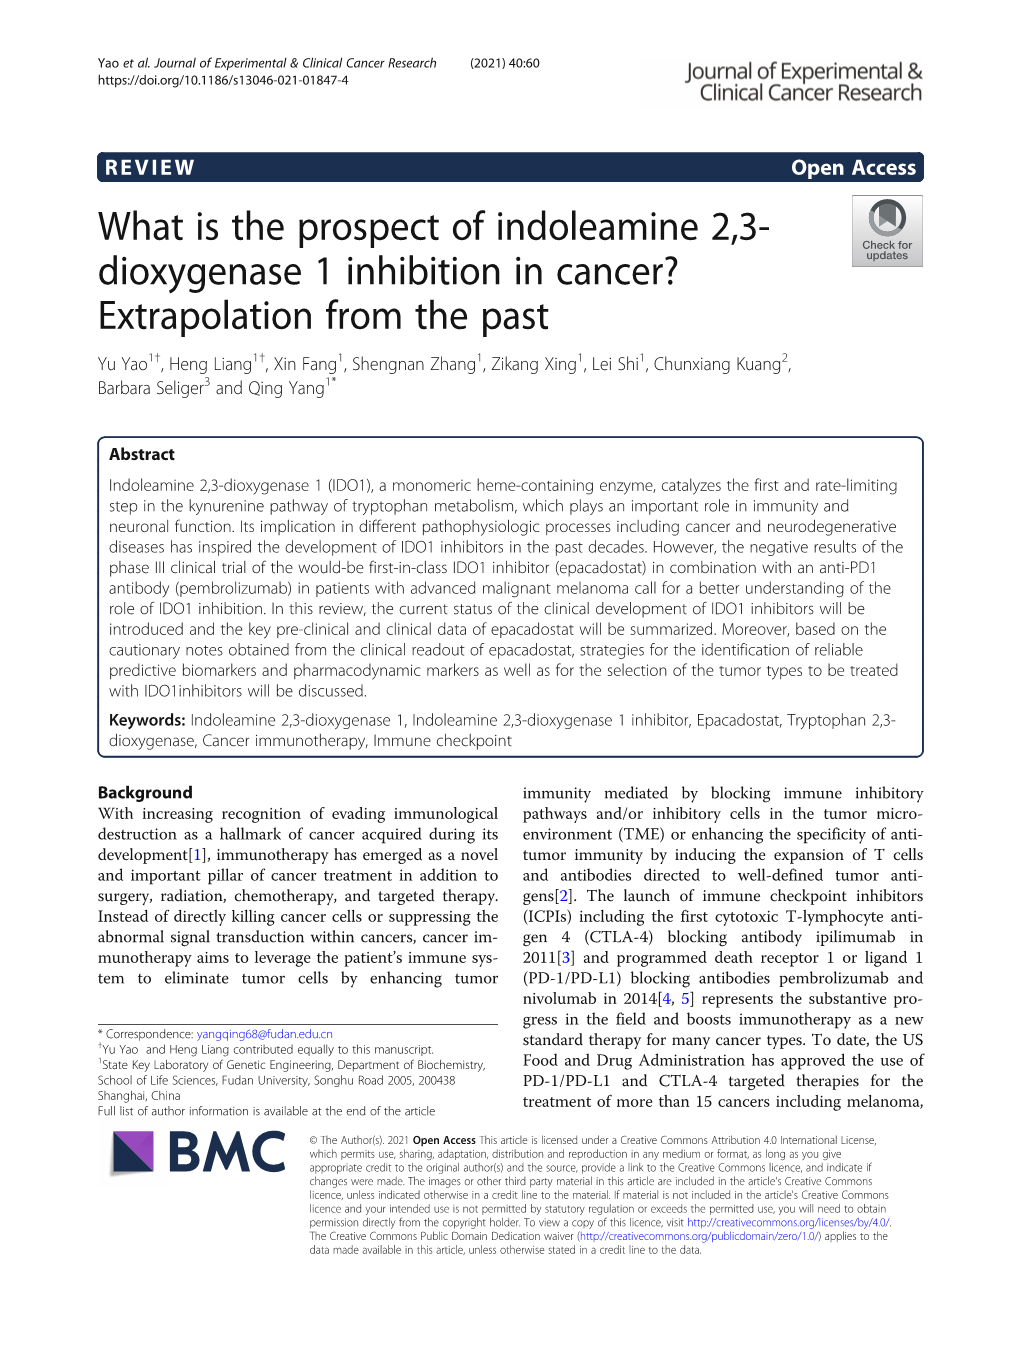 What Is the Prospect of Indoleamine 2,3-Dioxygenase 1 Inhibition in Cancer?